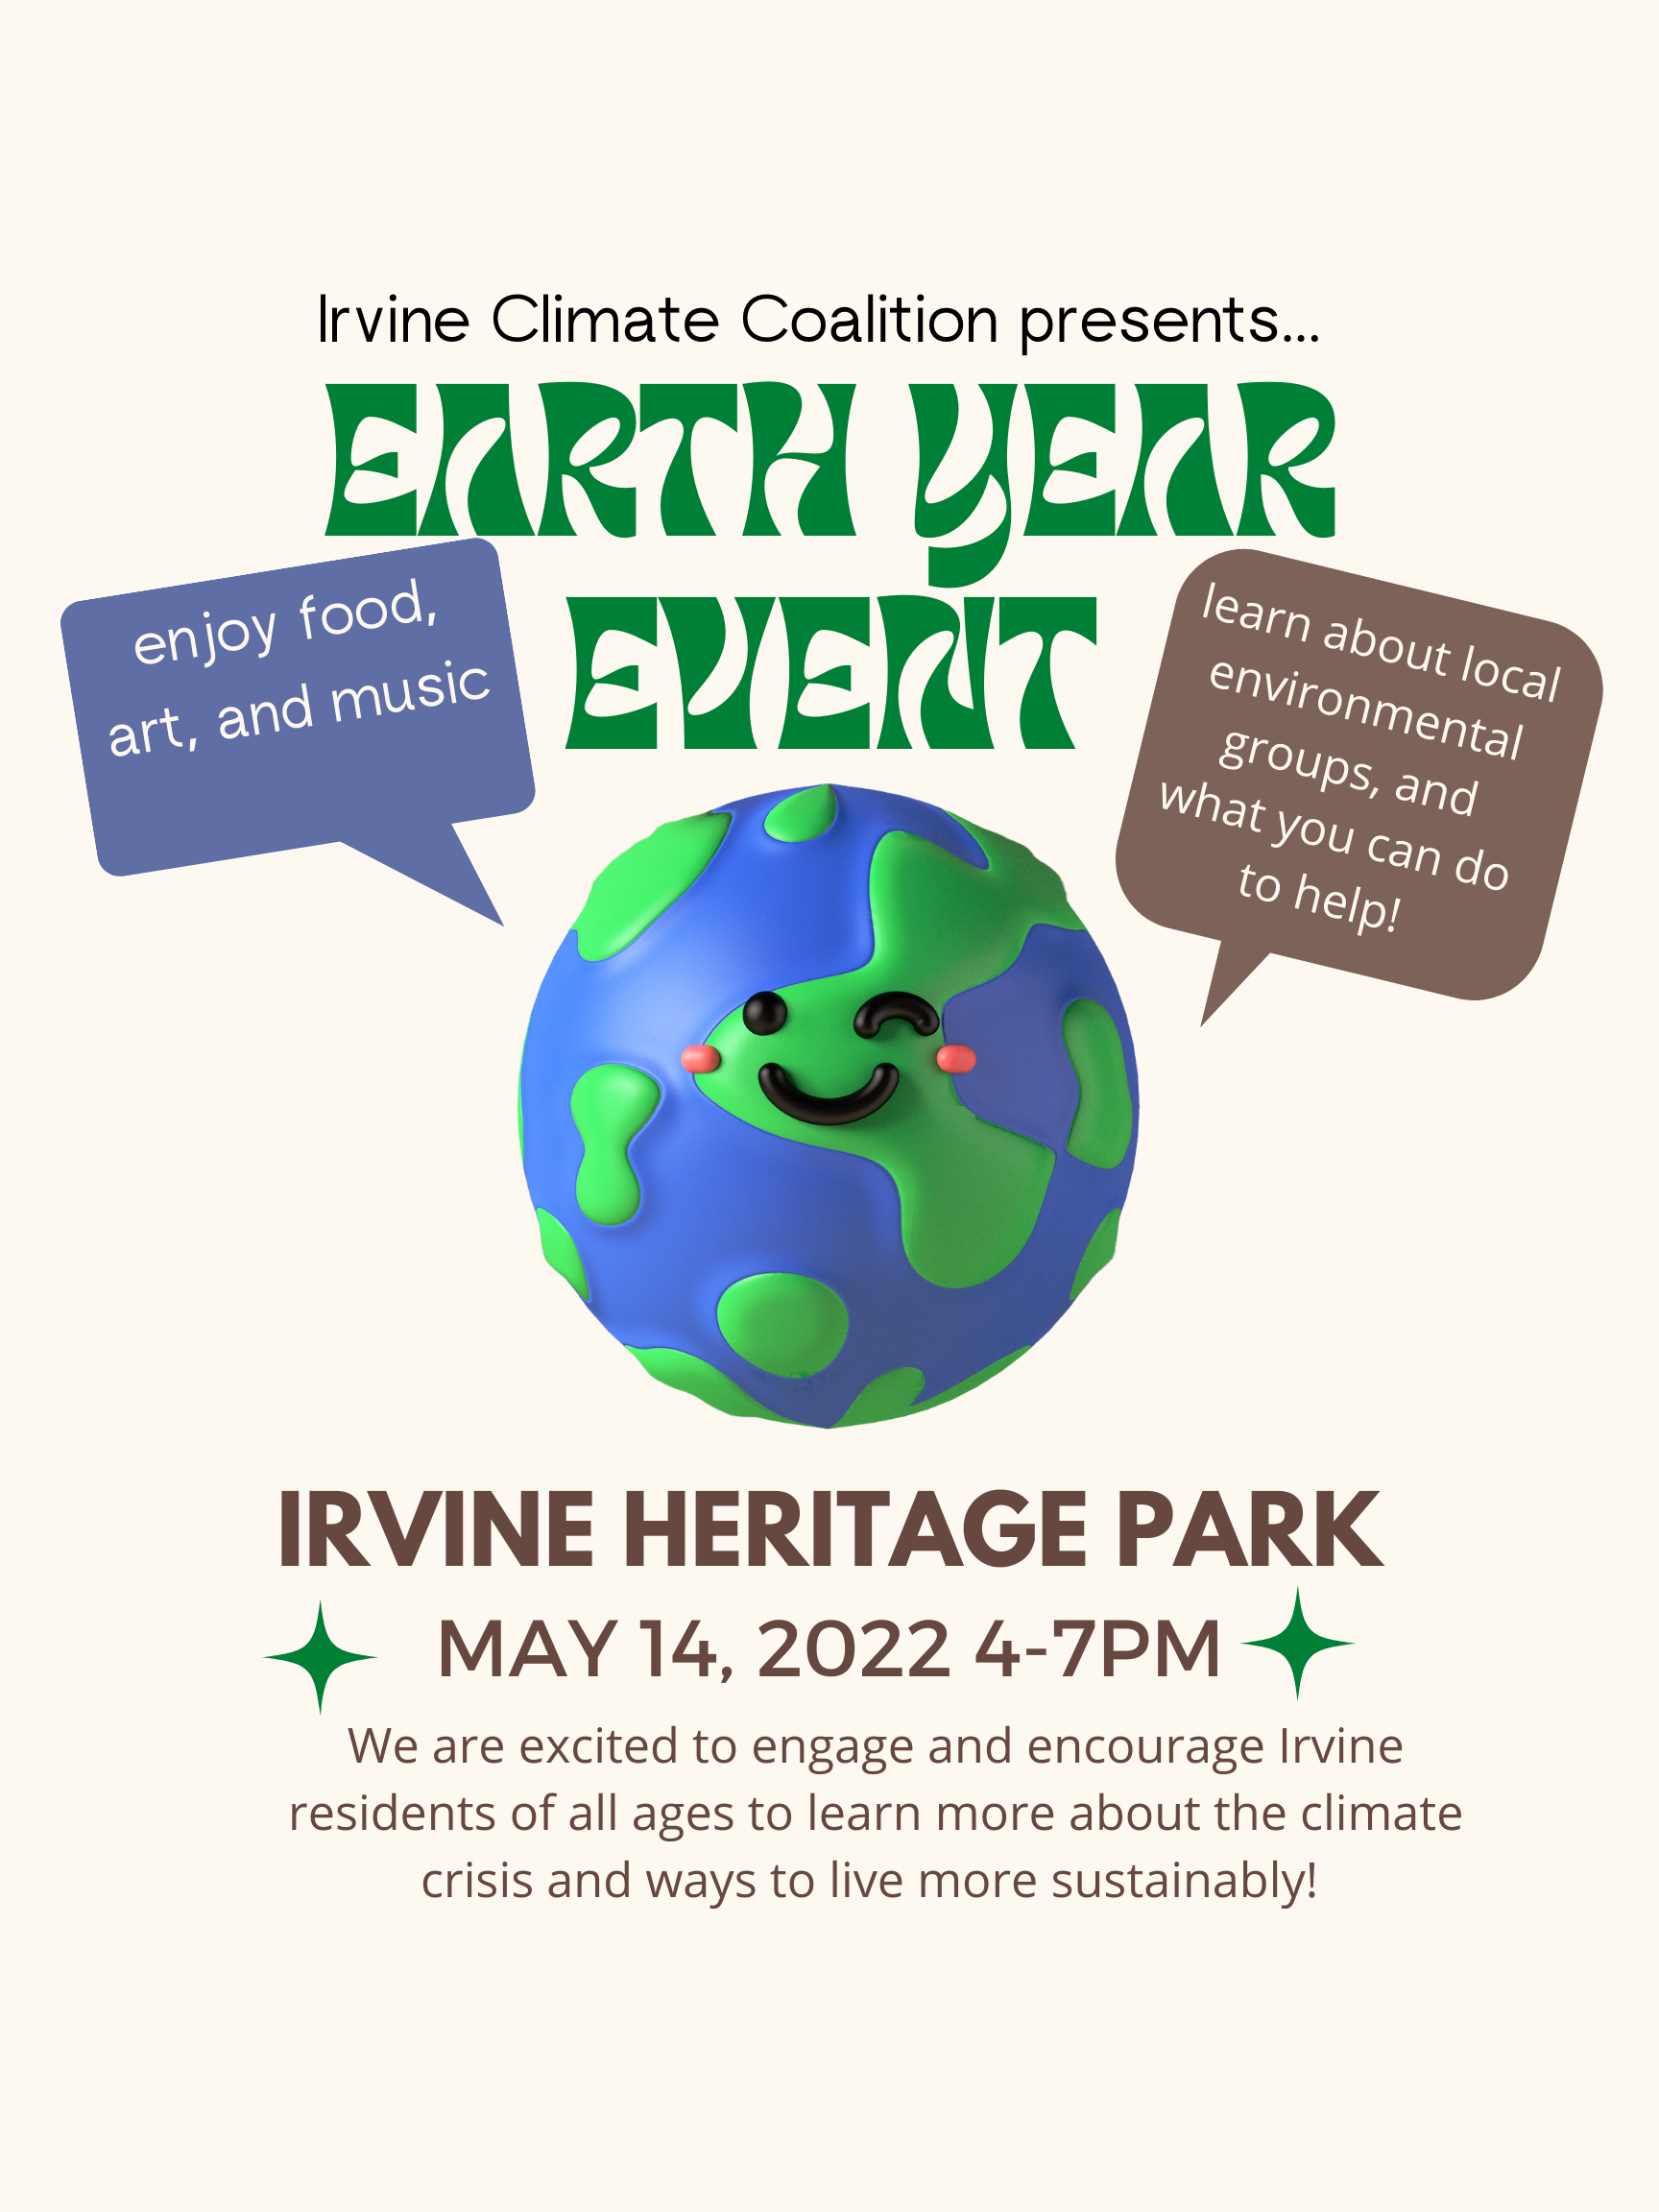 earth year event outreach flyer-2.png